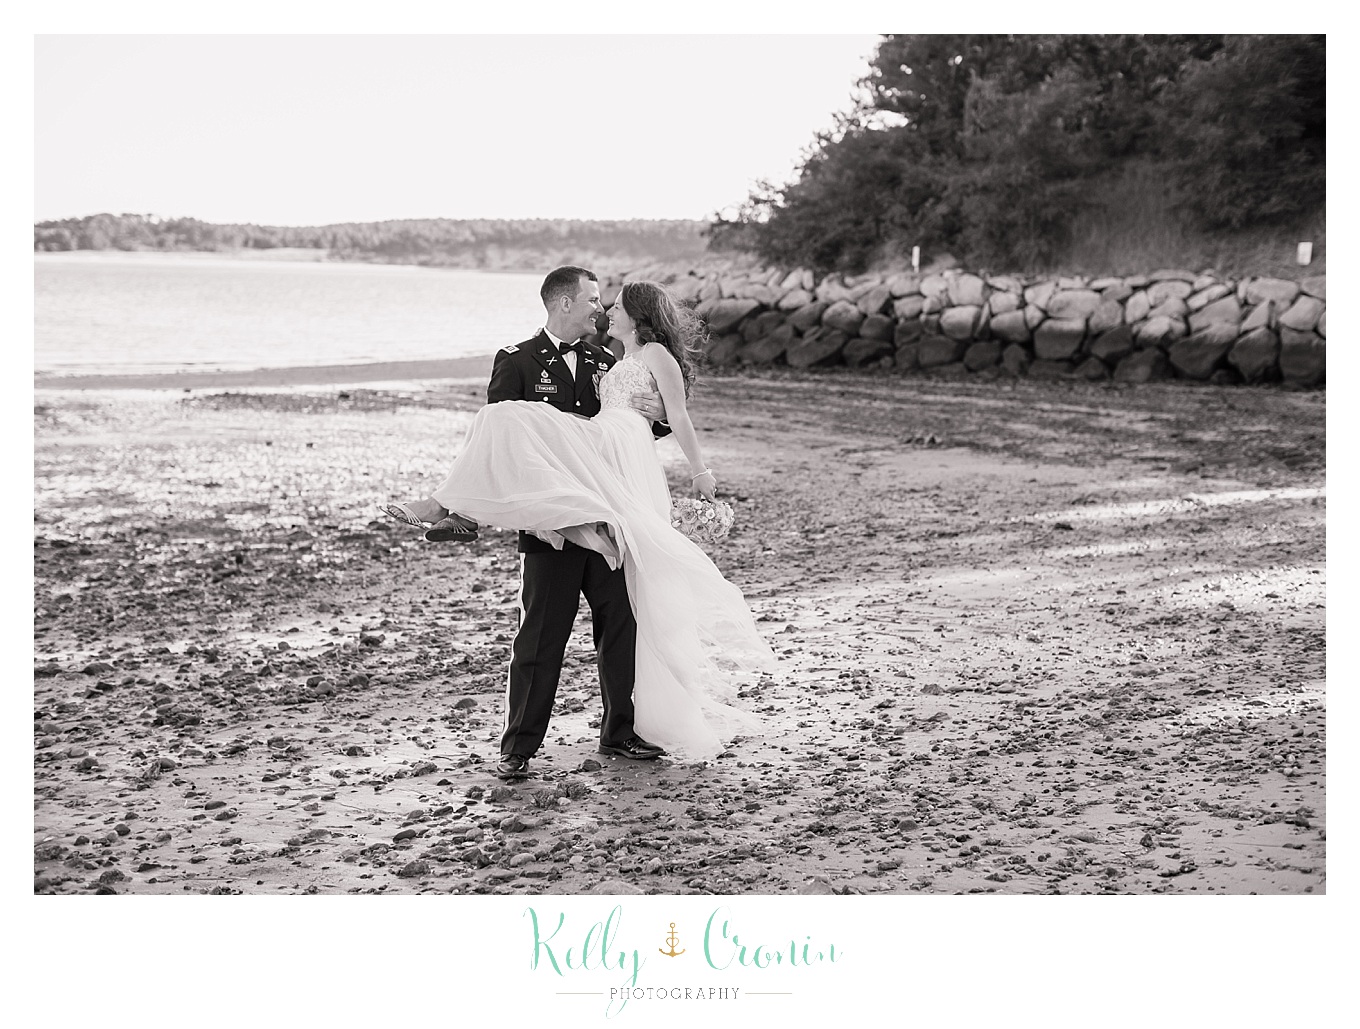 A groom carries his bride | Wedding Photographer in Cape Cod | Kelly Cronin Photography